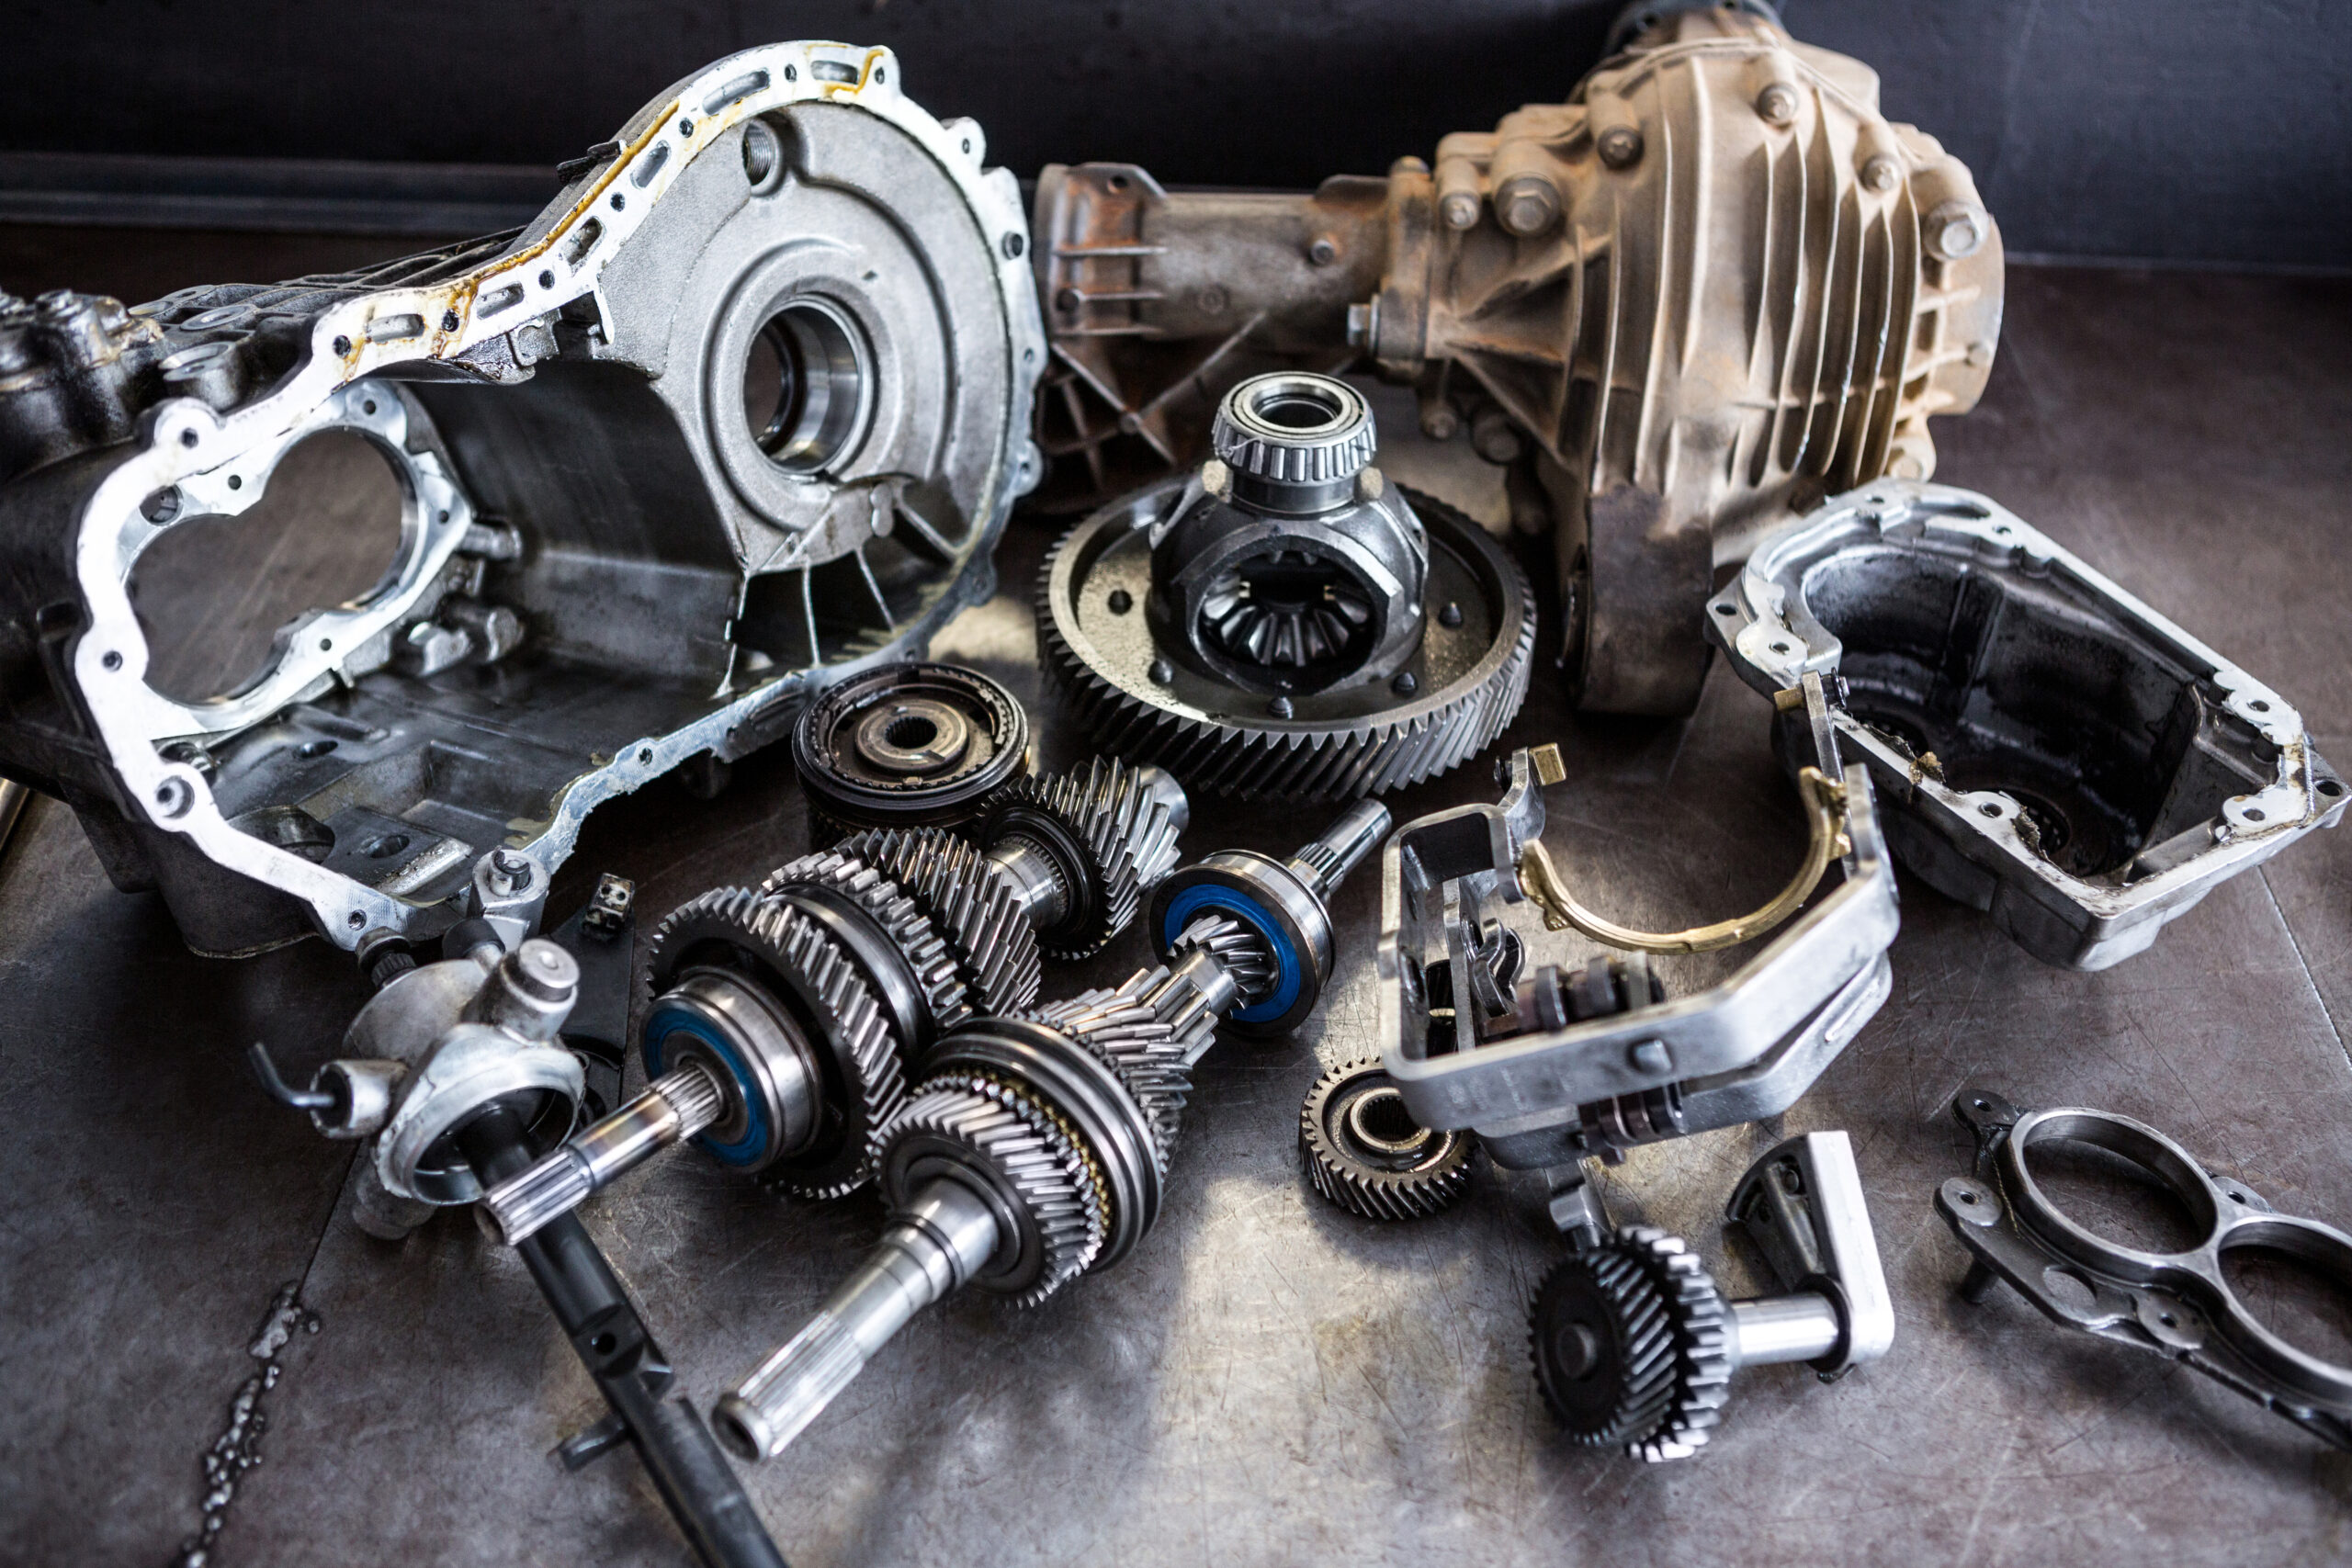 CVT Transmissions Or Automatic Transmissions: Which Are The Best?